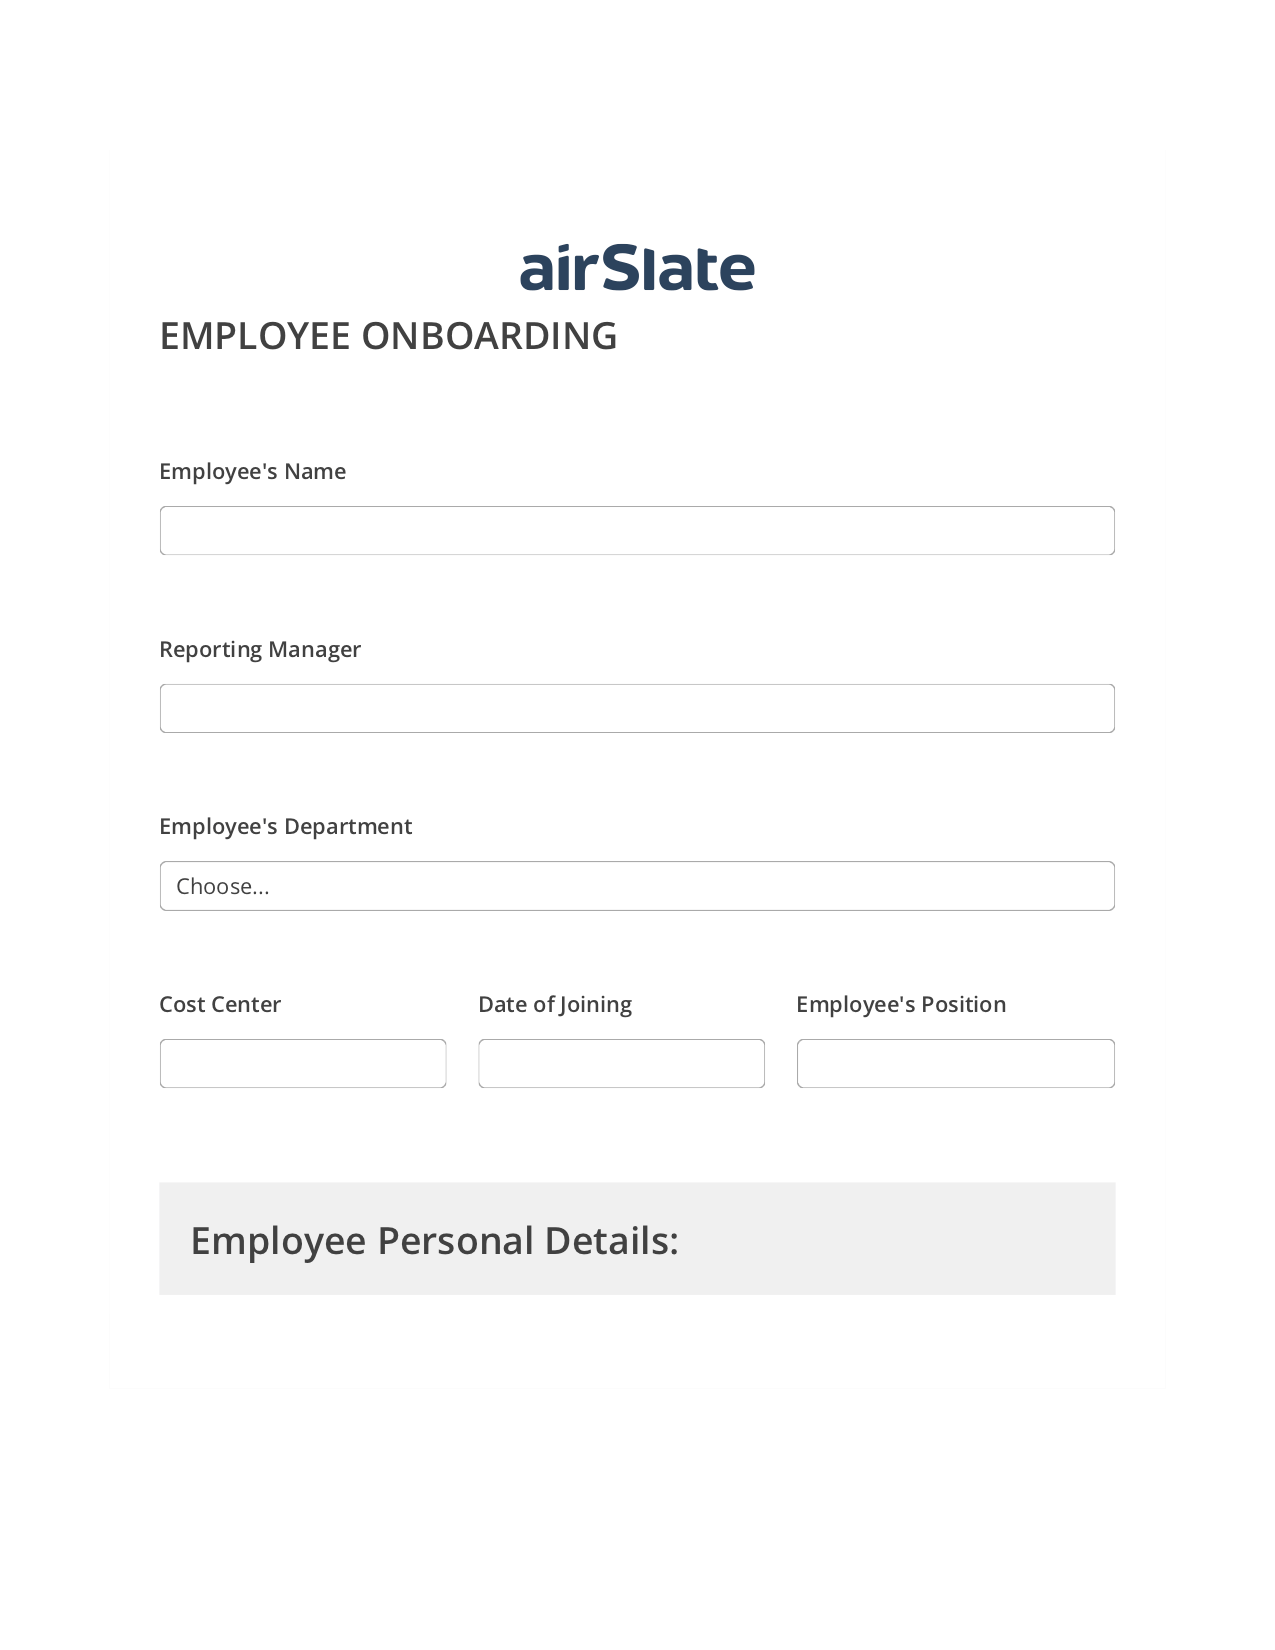 Multirole Employee Onboarding Workflow Pre-fill Slate from MS Dynamics 365 record, Webhook Bot, Archive to SharePoint Folder Bot